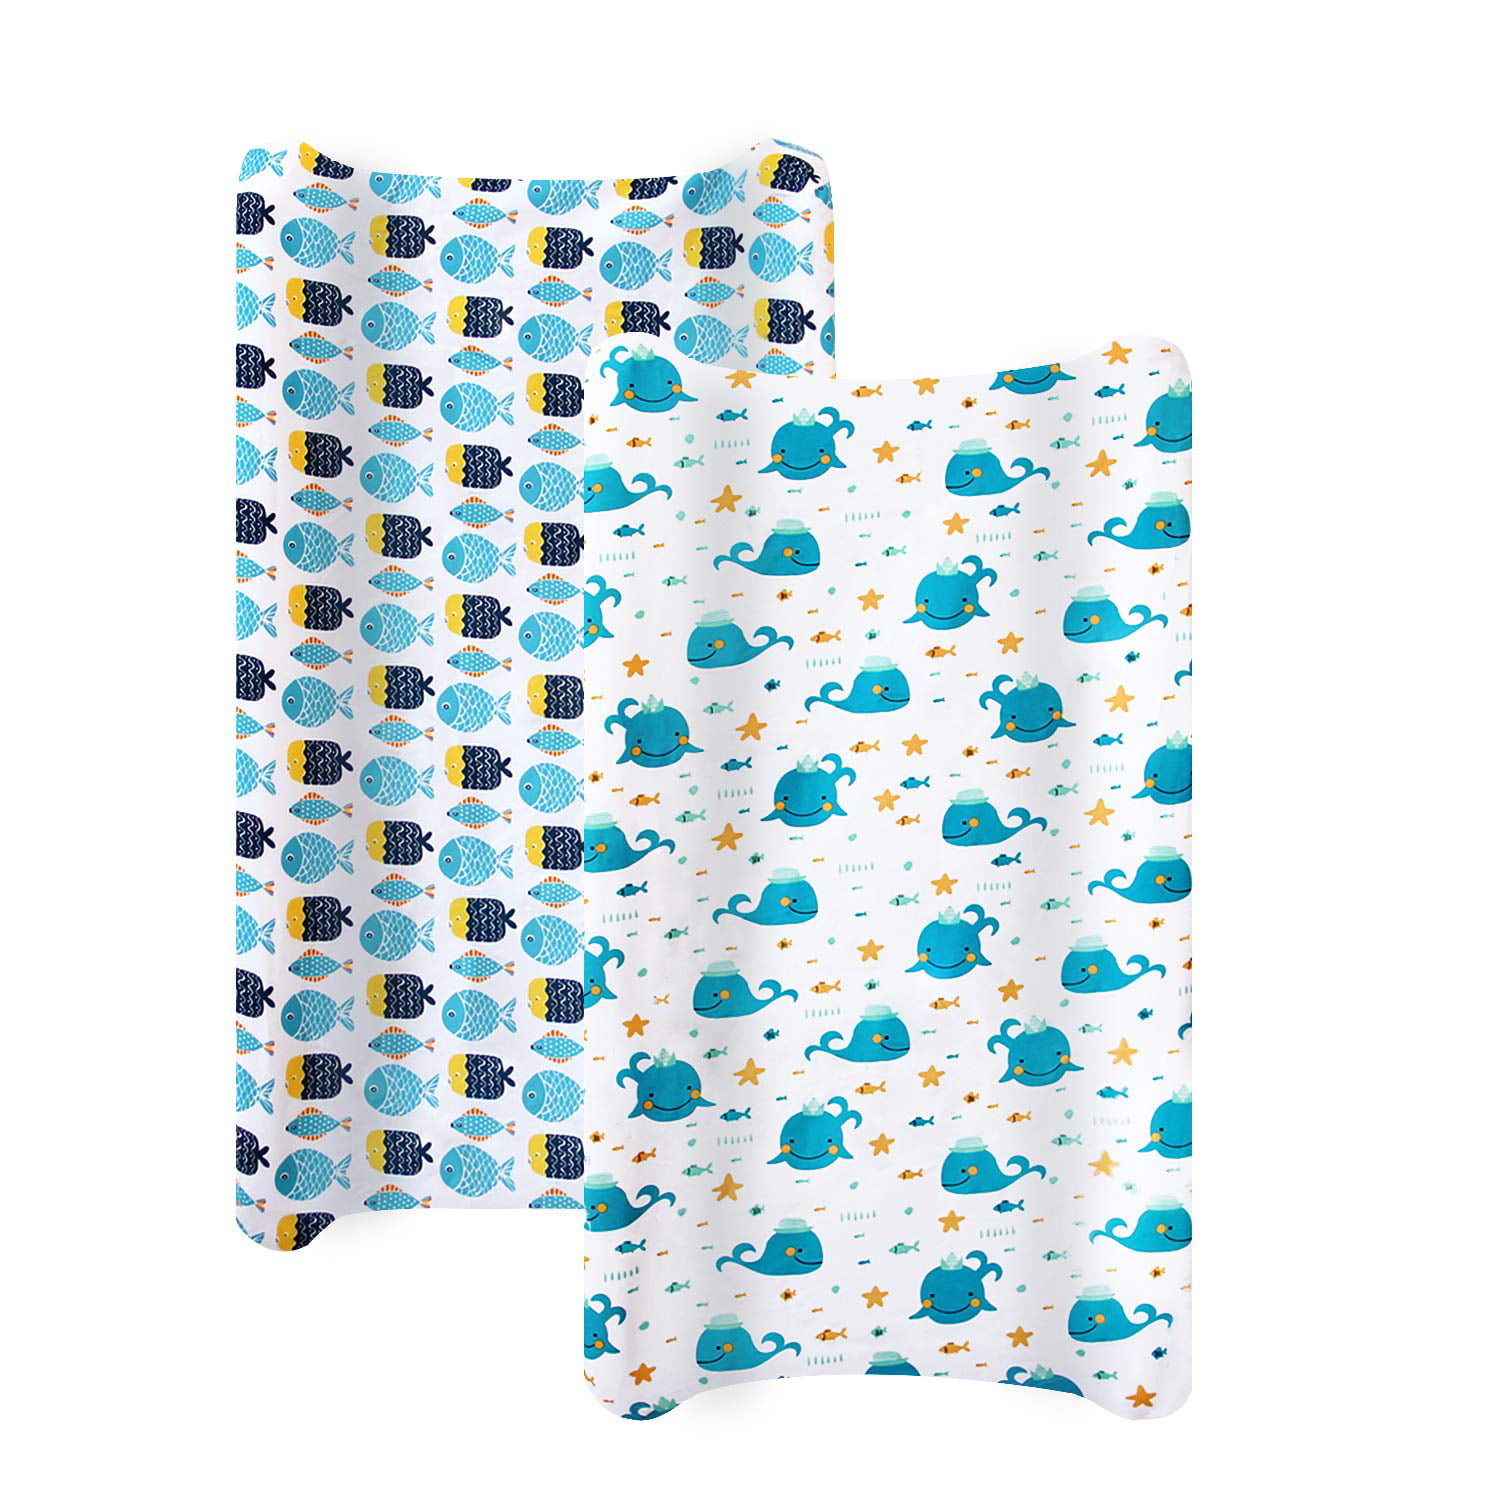 100% Cotton Jersey Knit Soft Changing Pad Cover Biloban Changing Pad Cover Diaper Changing Pad Cover for Baby Change Table Pads 2 Pack Cute Print for Boys Girls 